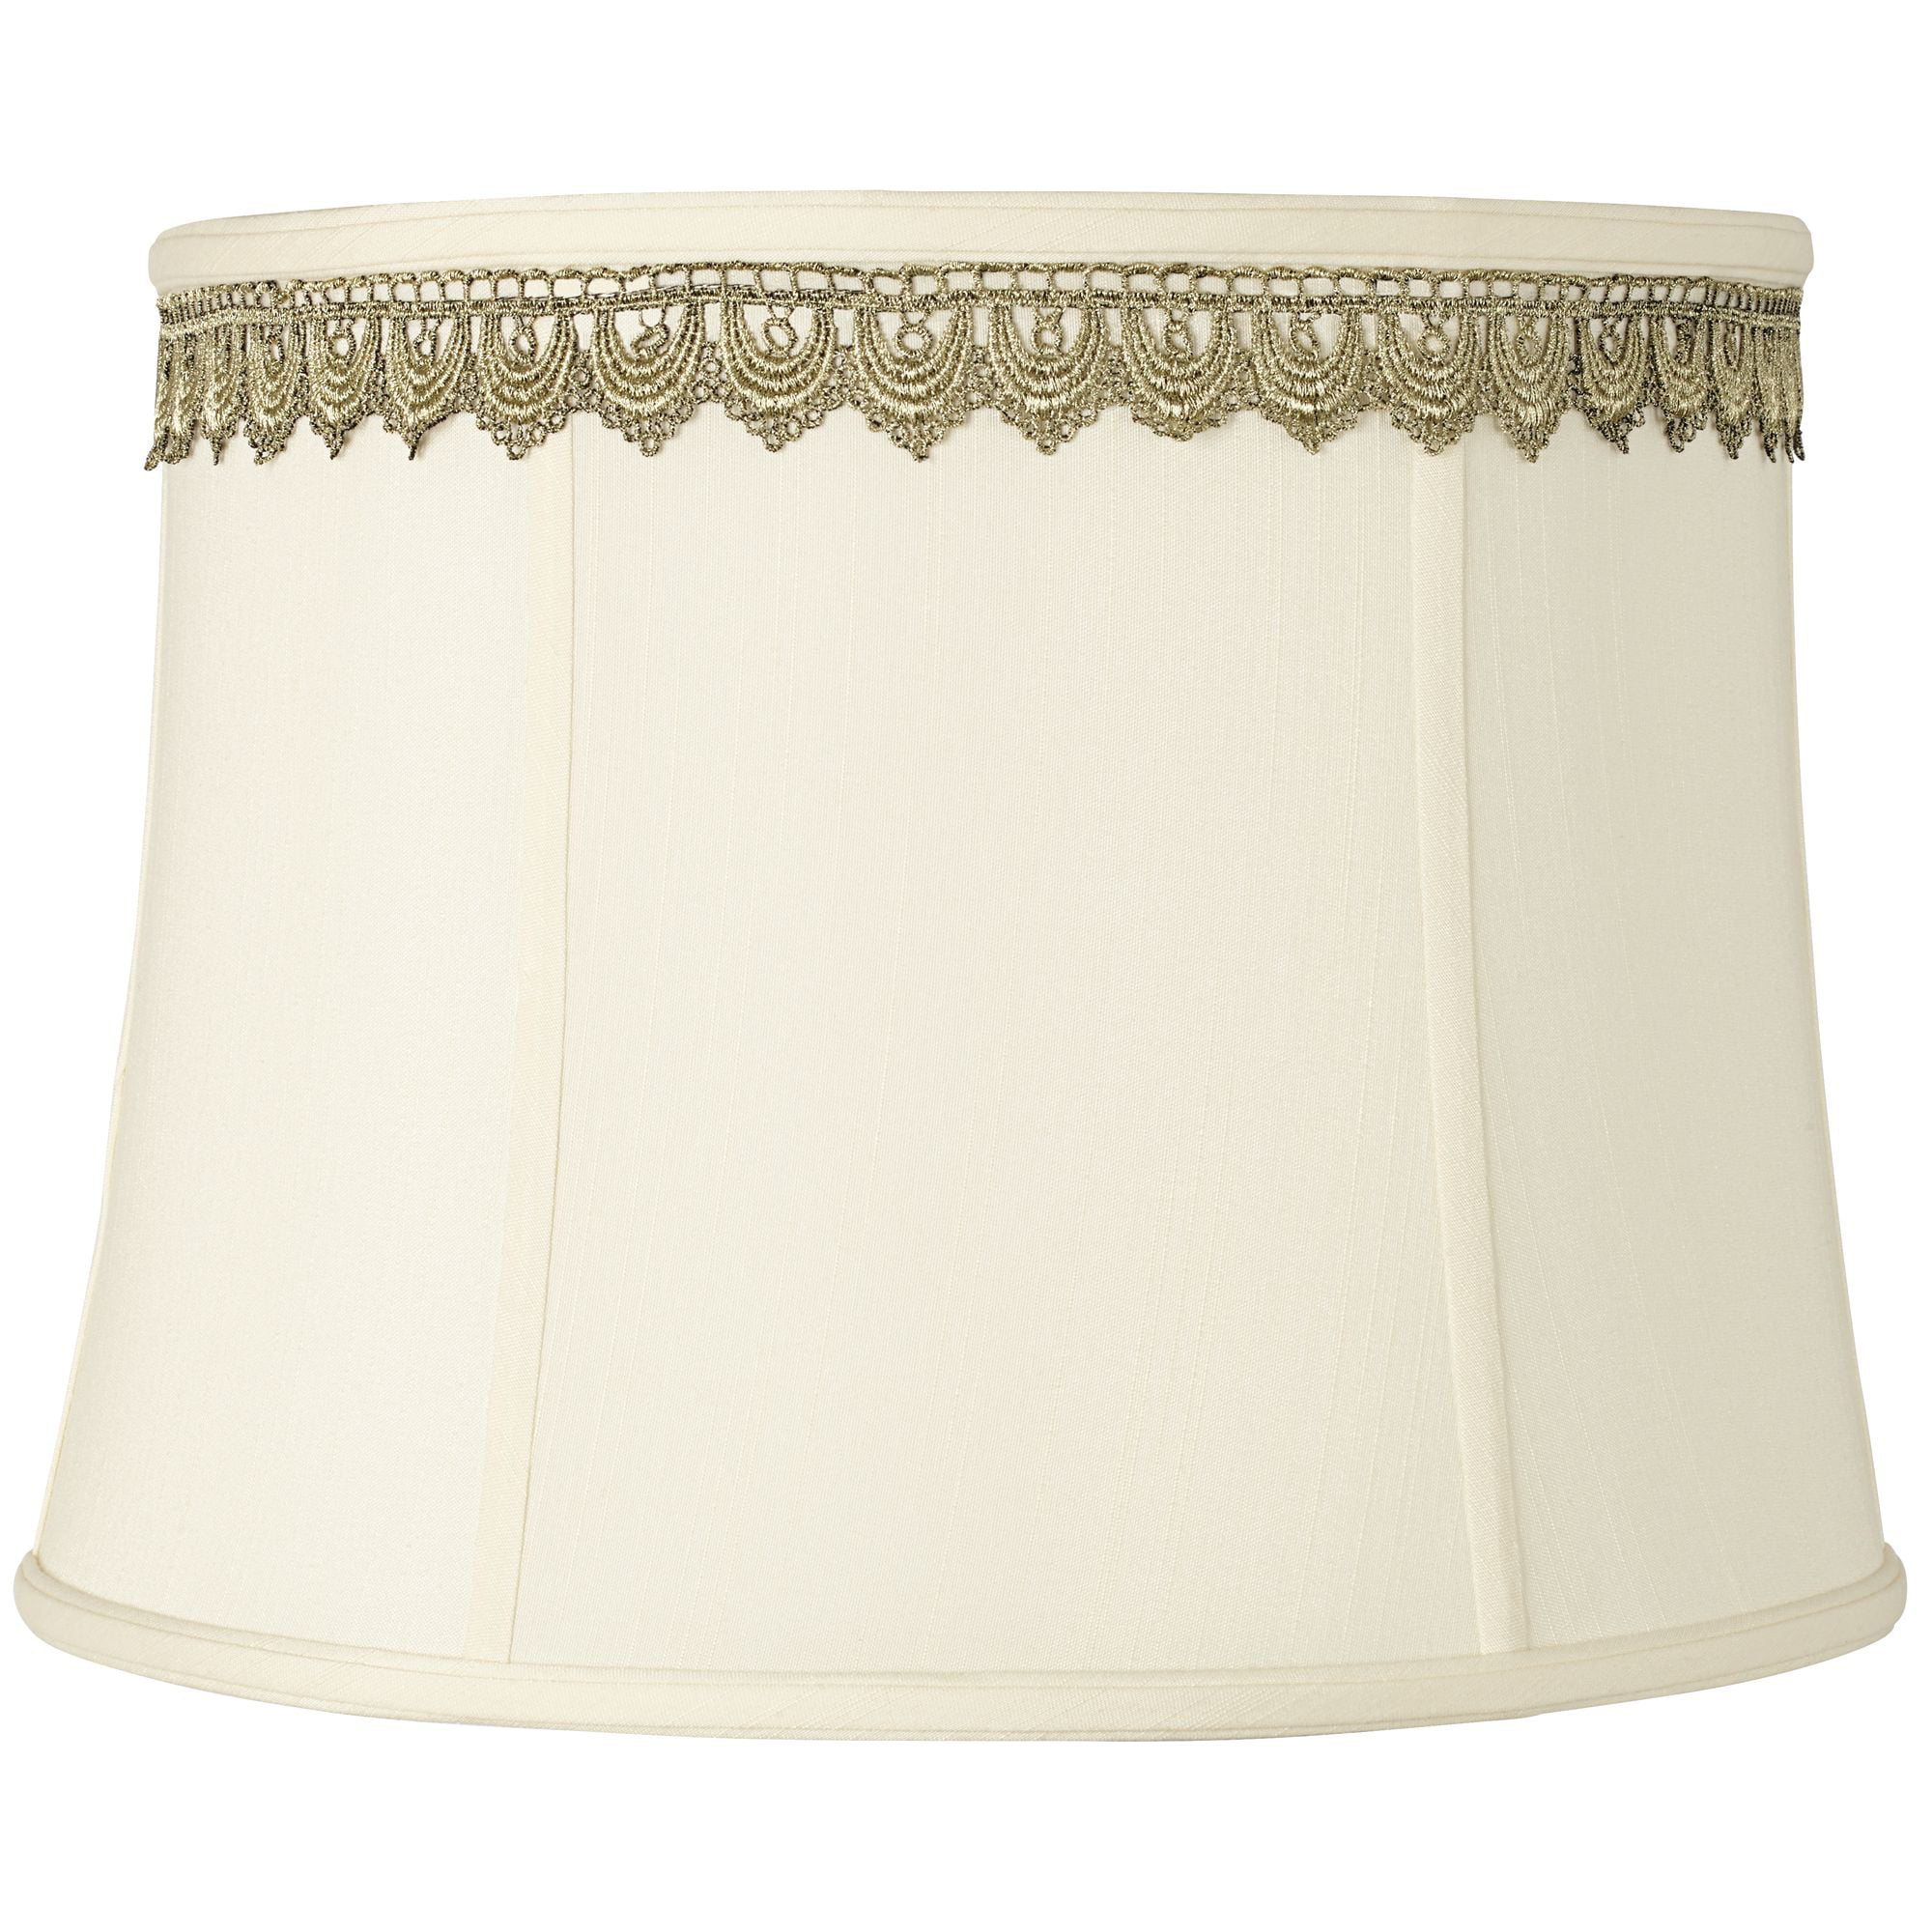 Spider White Drum Lamp Shade with Crystal Trim 13x15x10